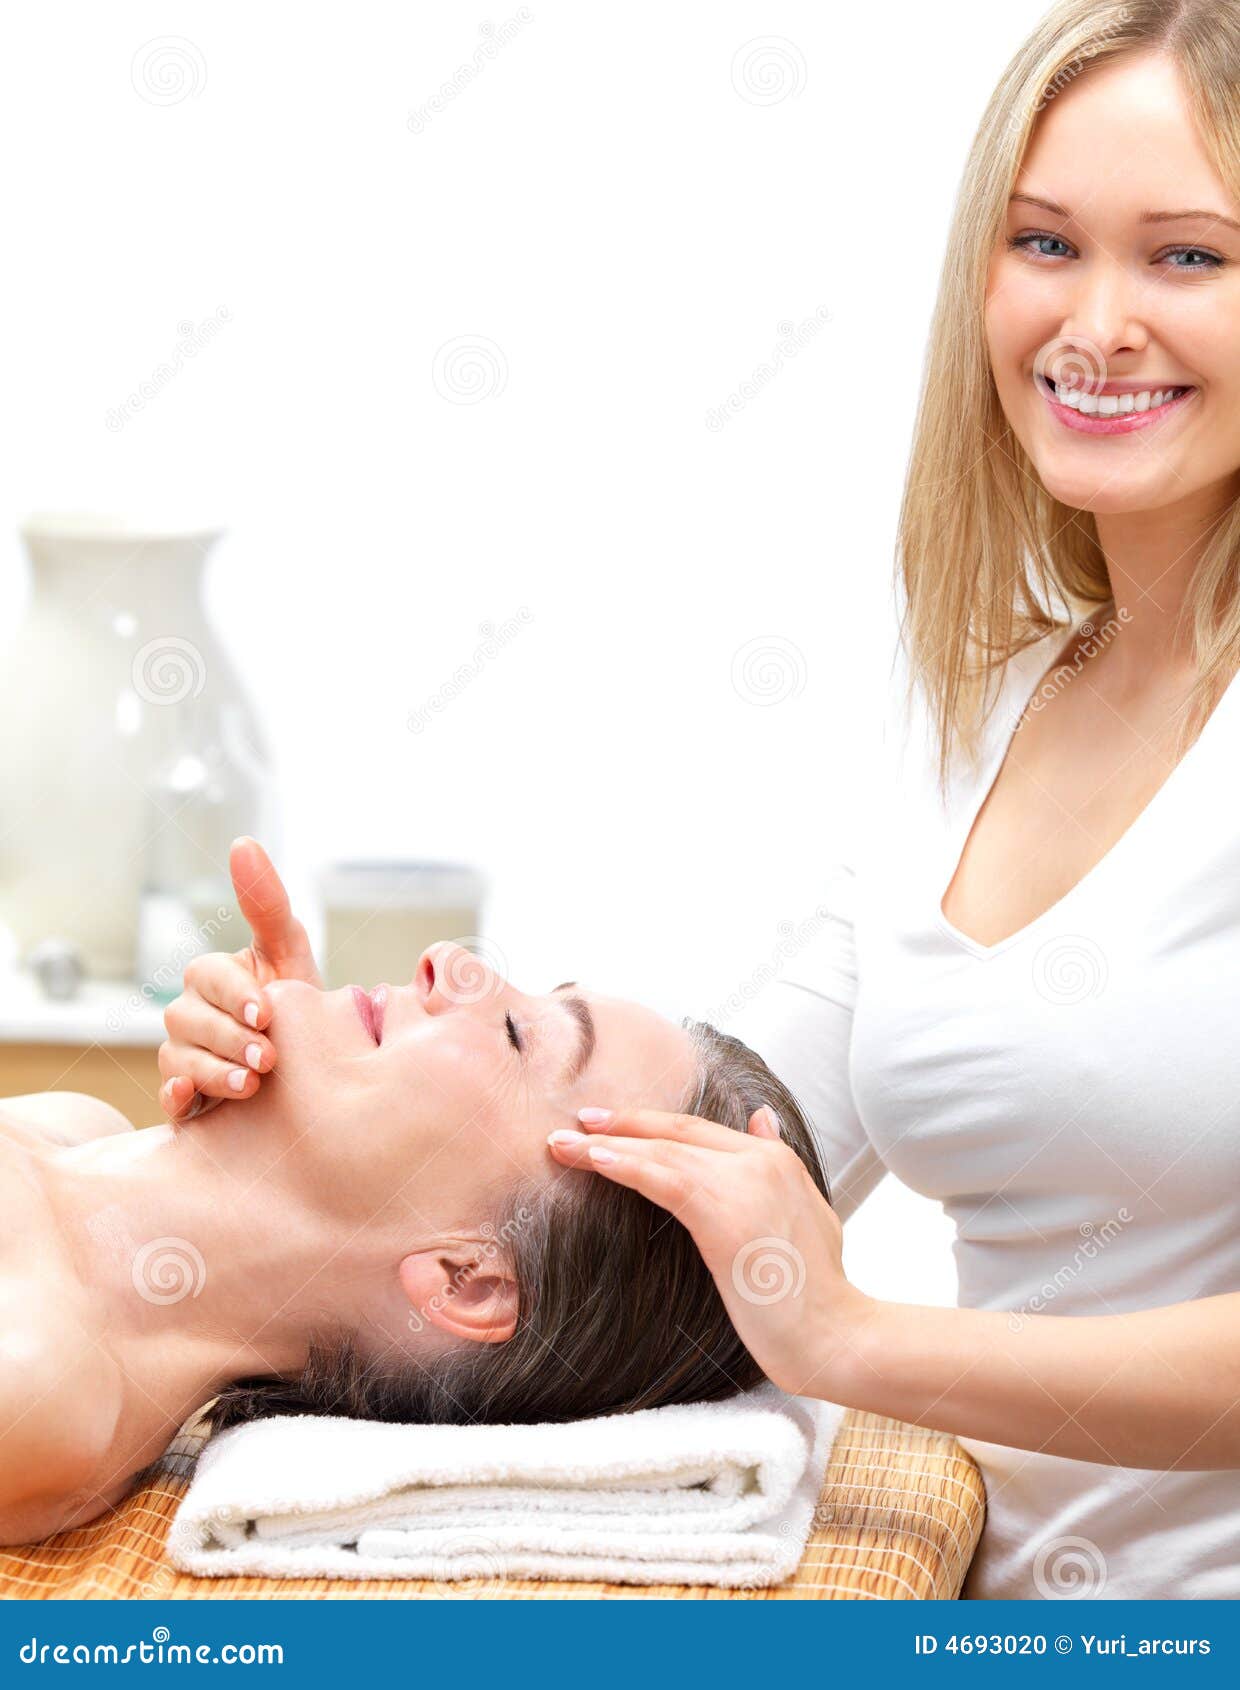 Smiling Therapist Giving Senior Woman A Massage Stock